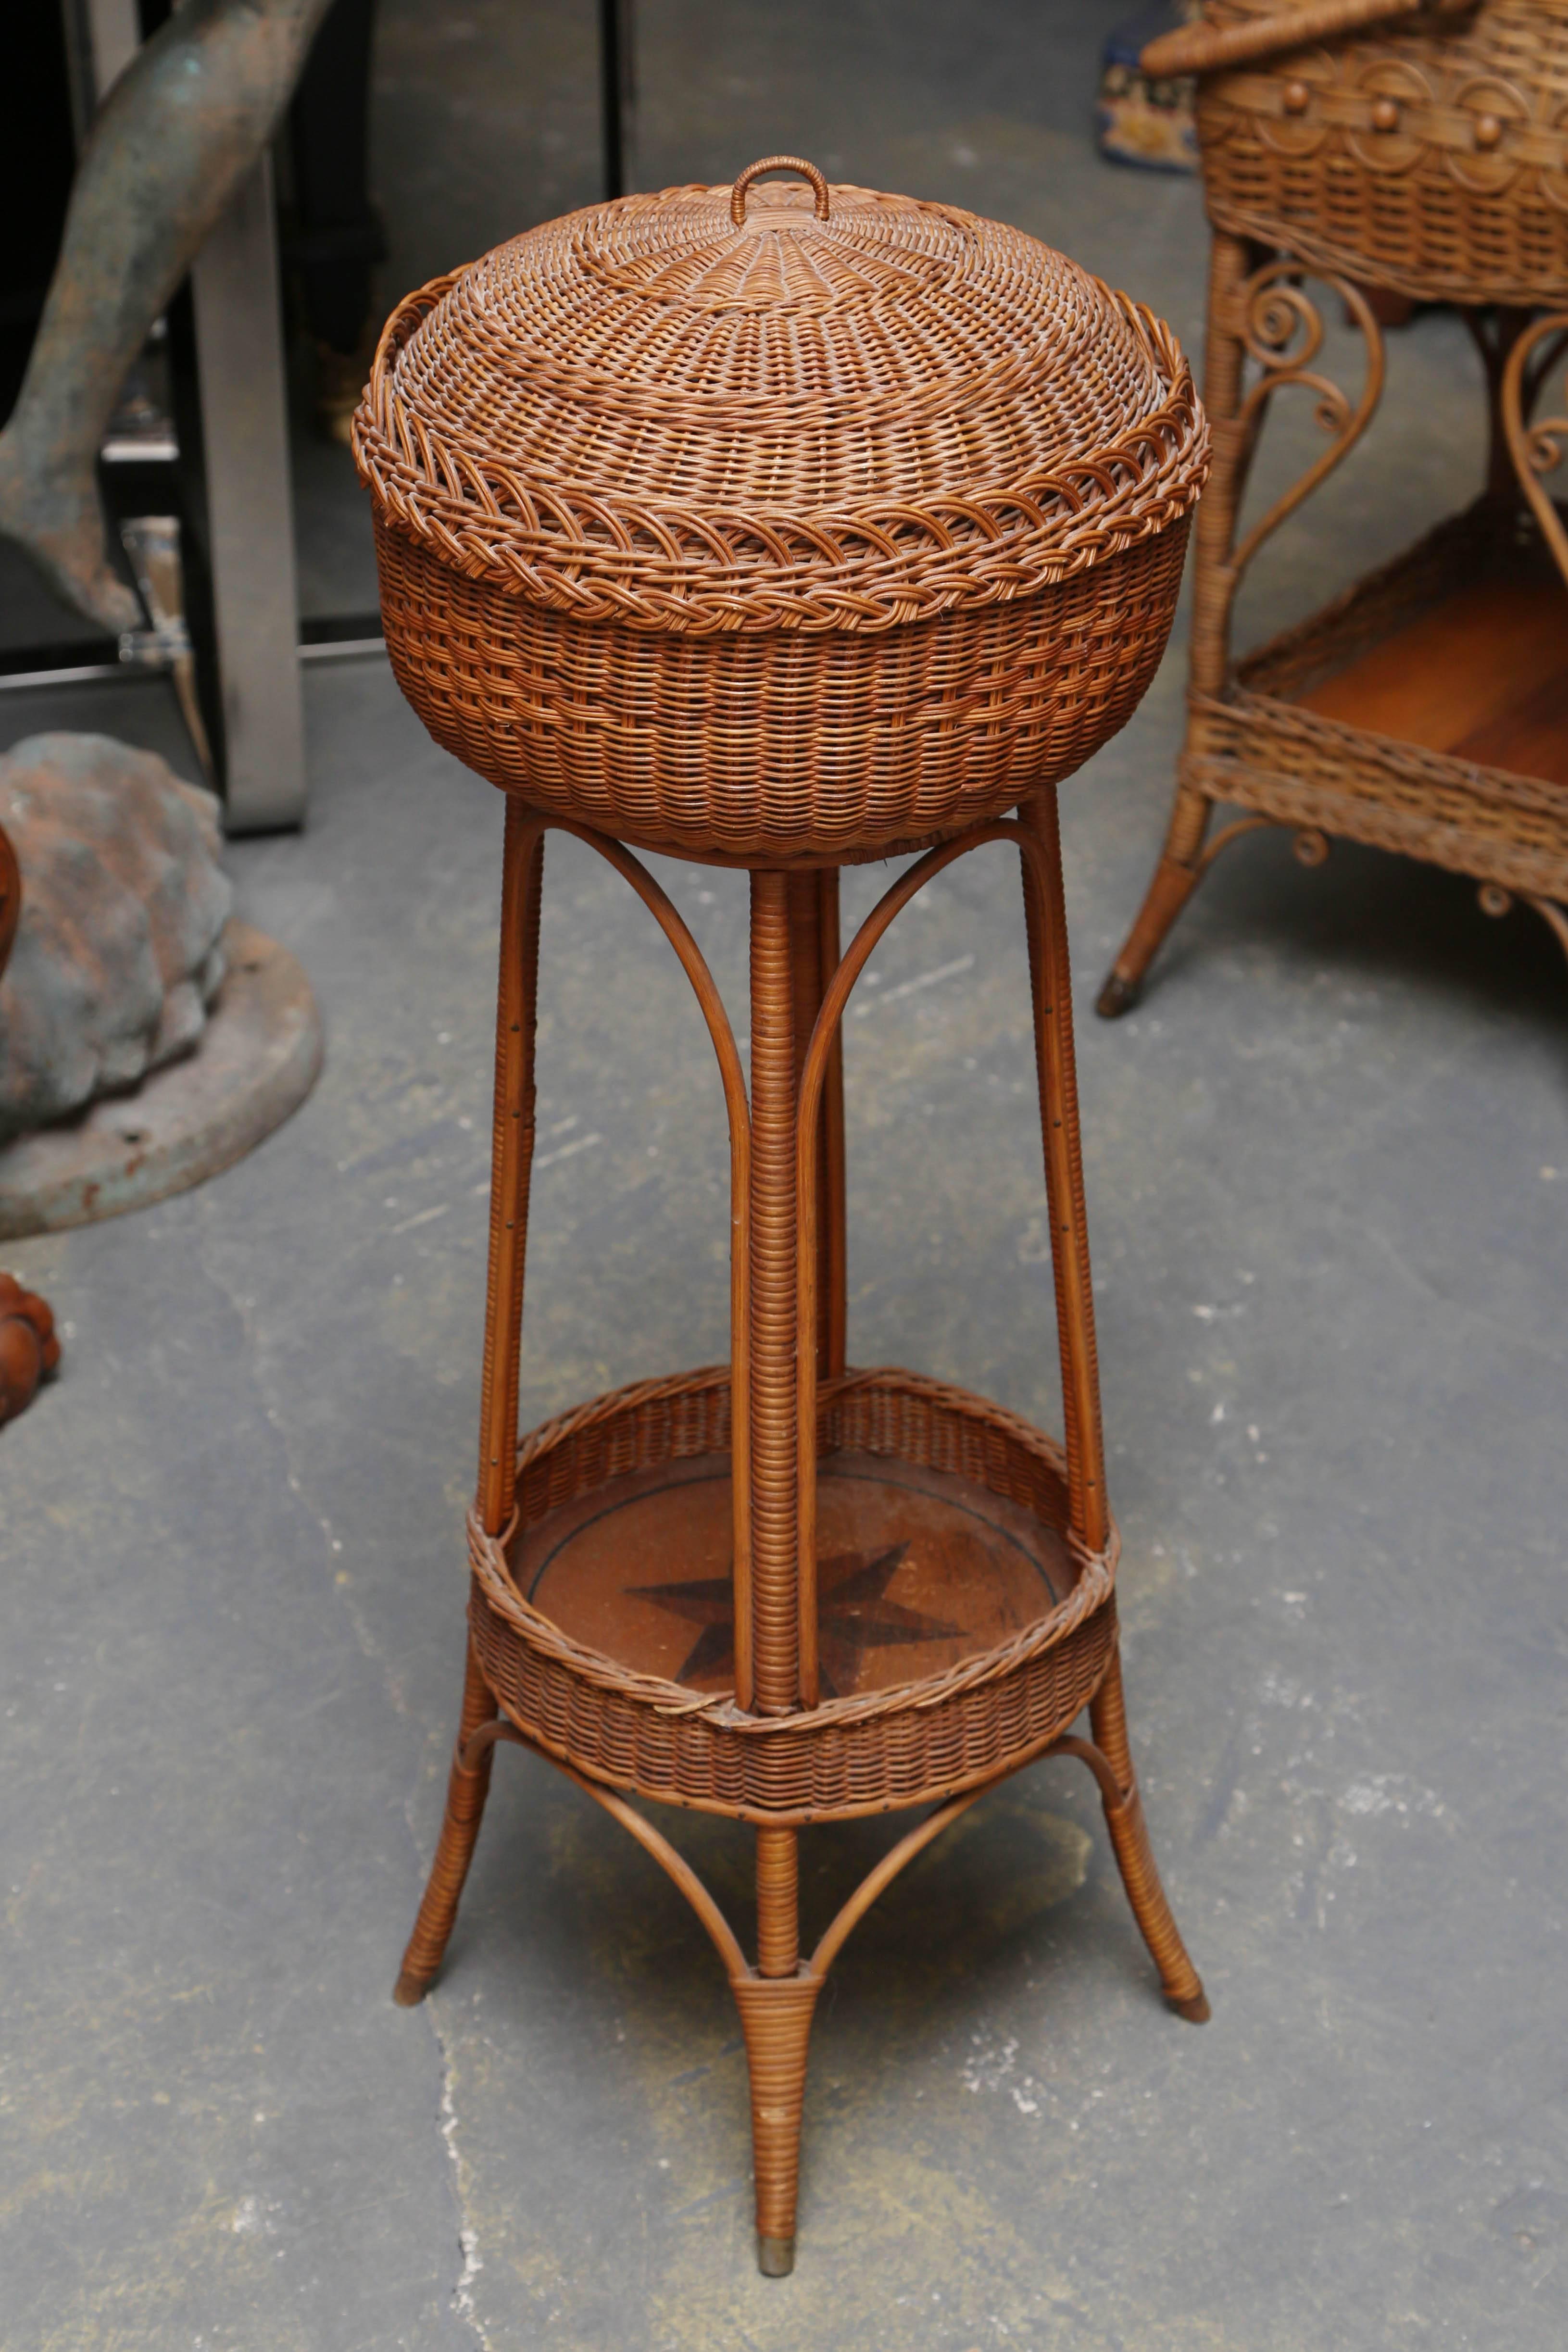 The wicker is tightly fashioned, possibly Heywood-Wakefield.
It is appointed with an inlaid six sided star on its bottom shelf.